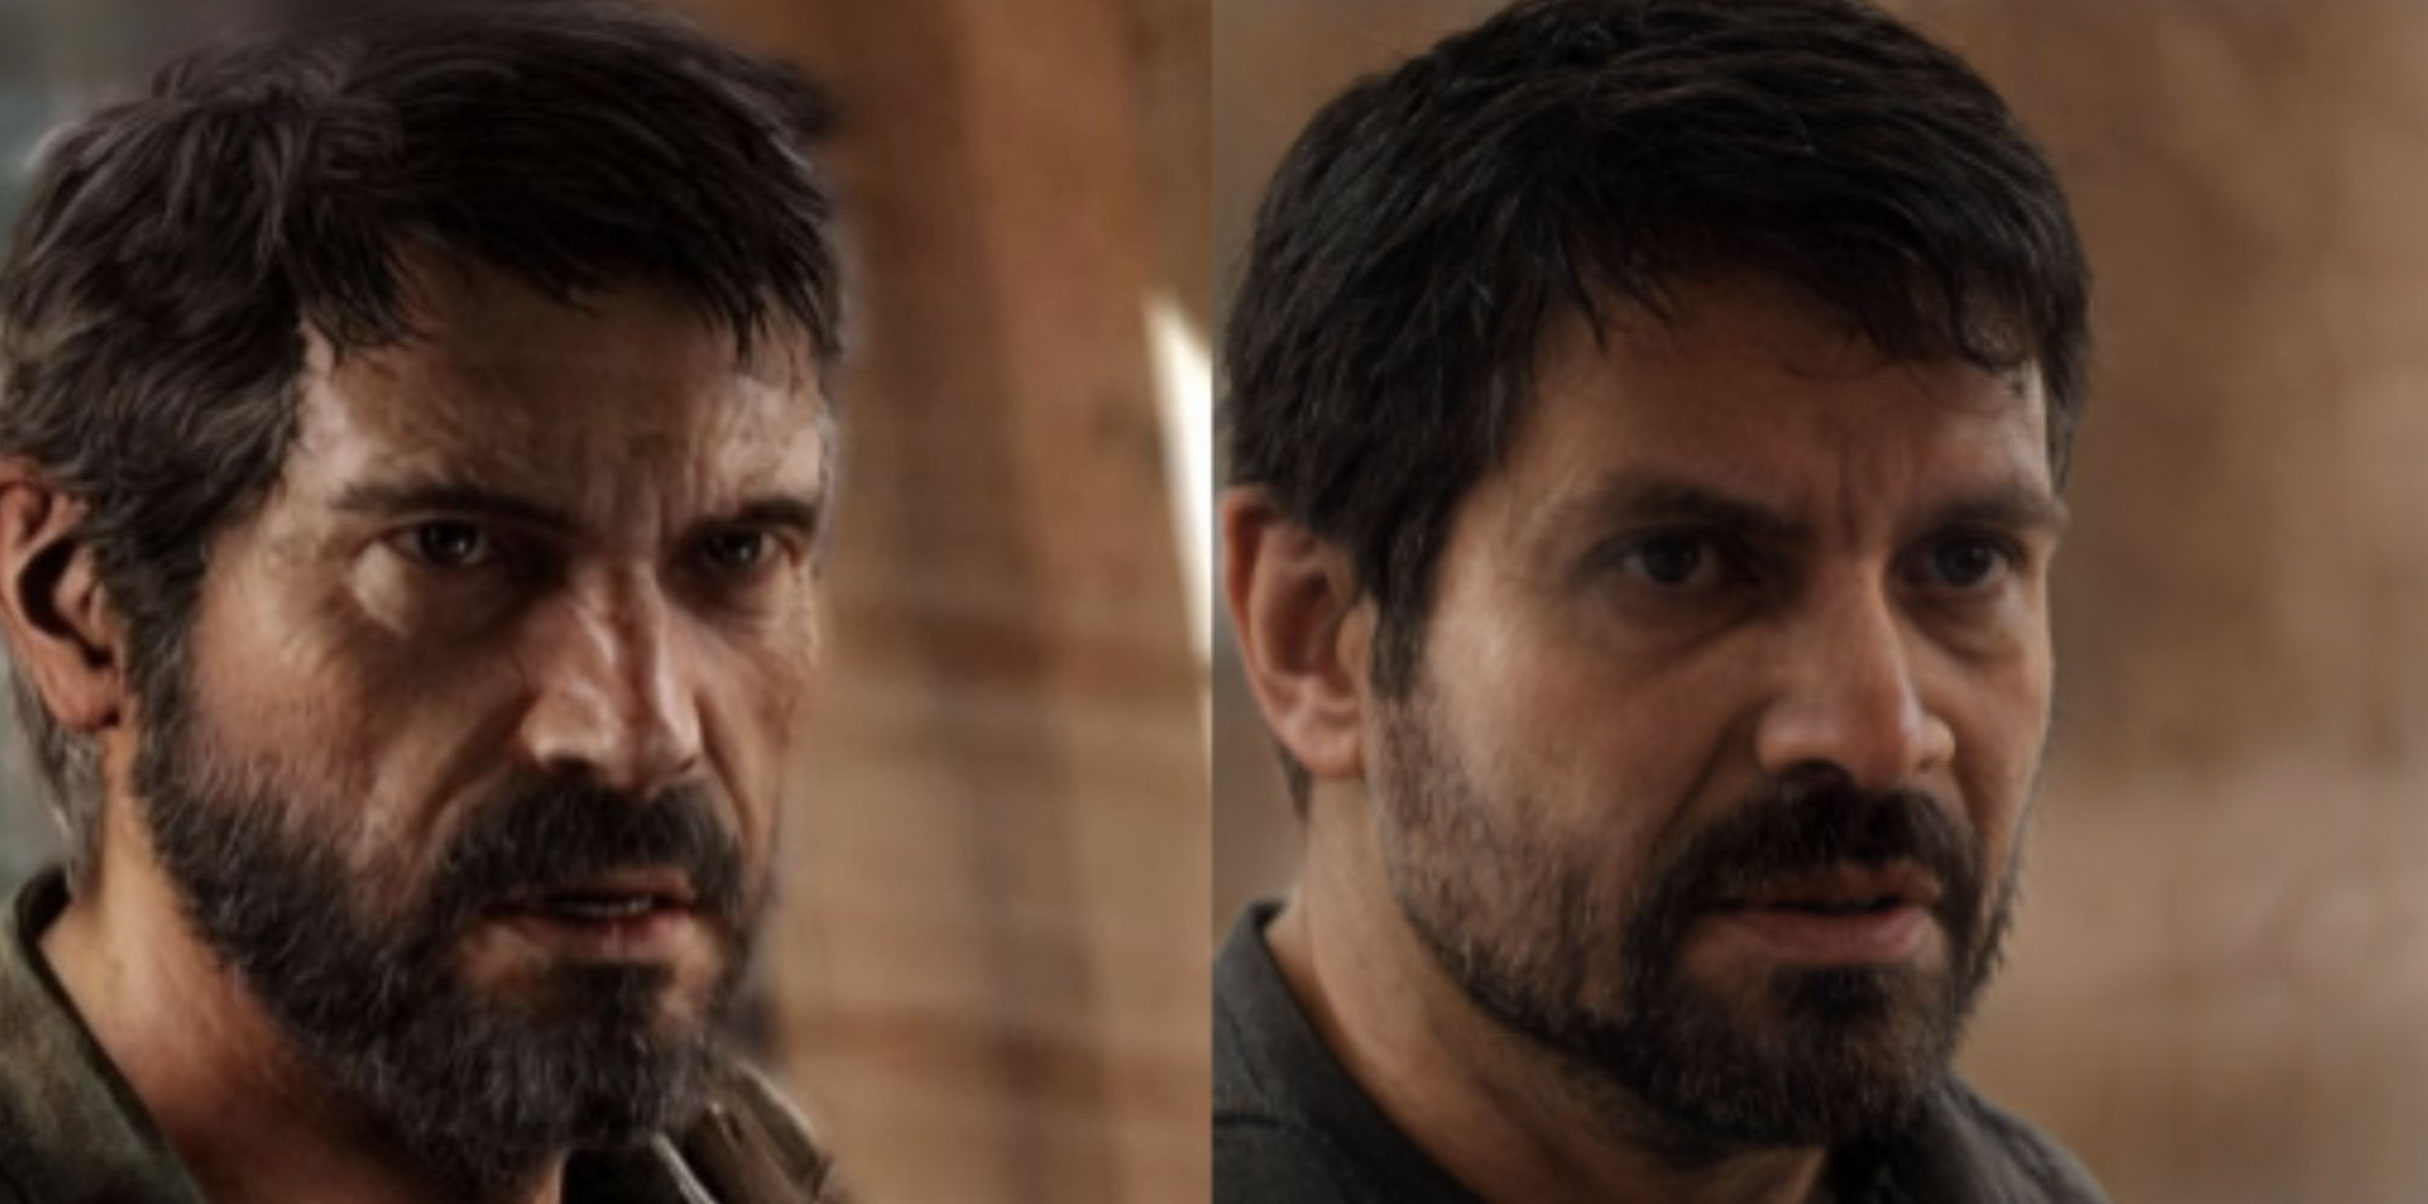 realistic video game characters - Joel (The Last of Us)